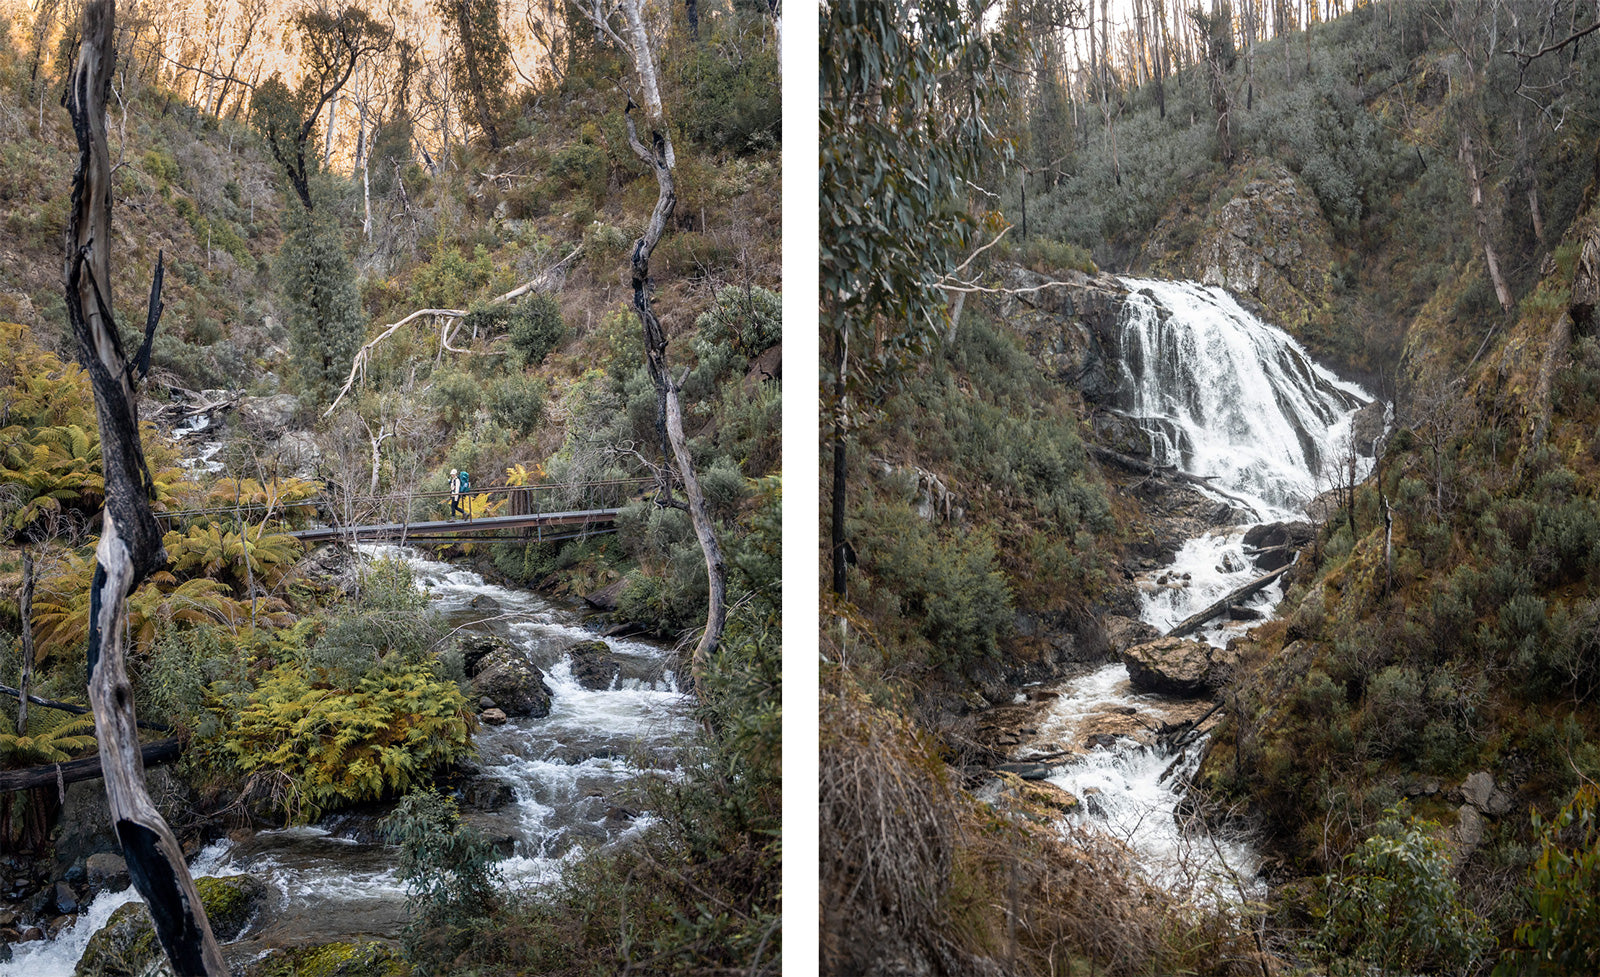 Buddong Falls in Kosciuszko National Park on the Hume and Hovell